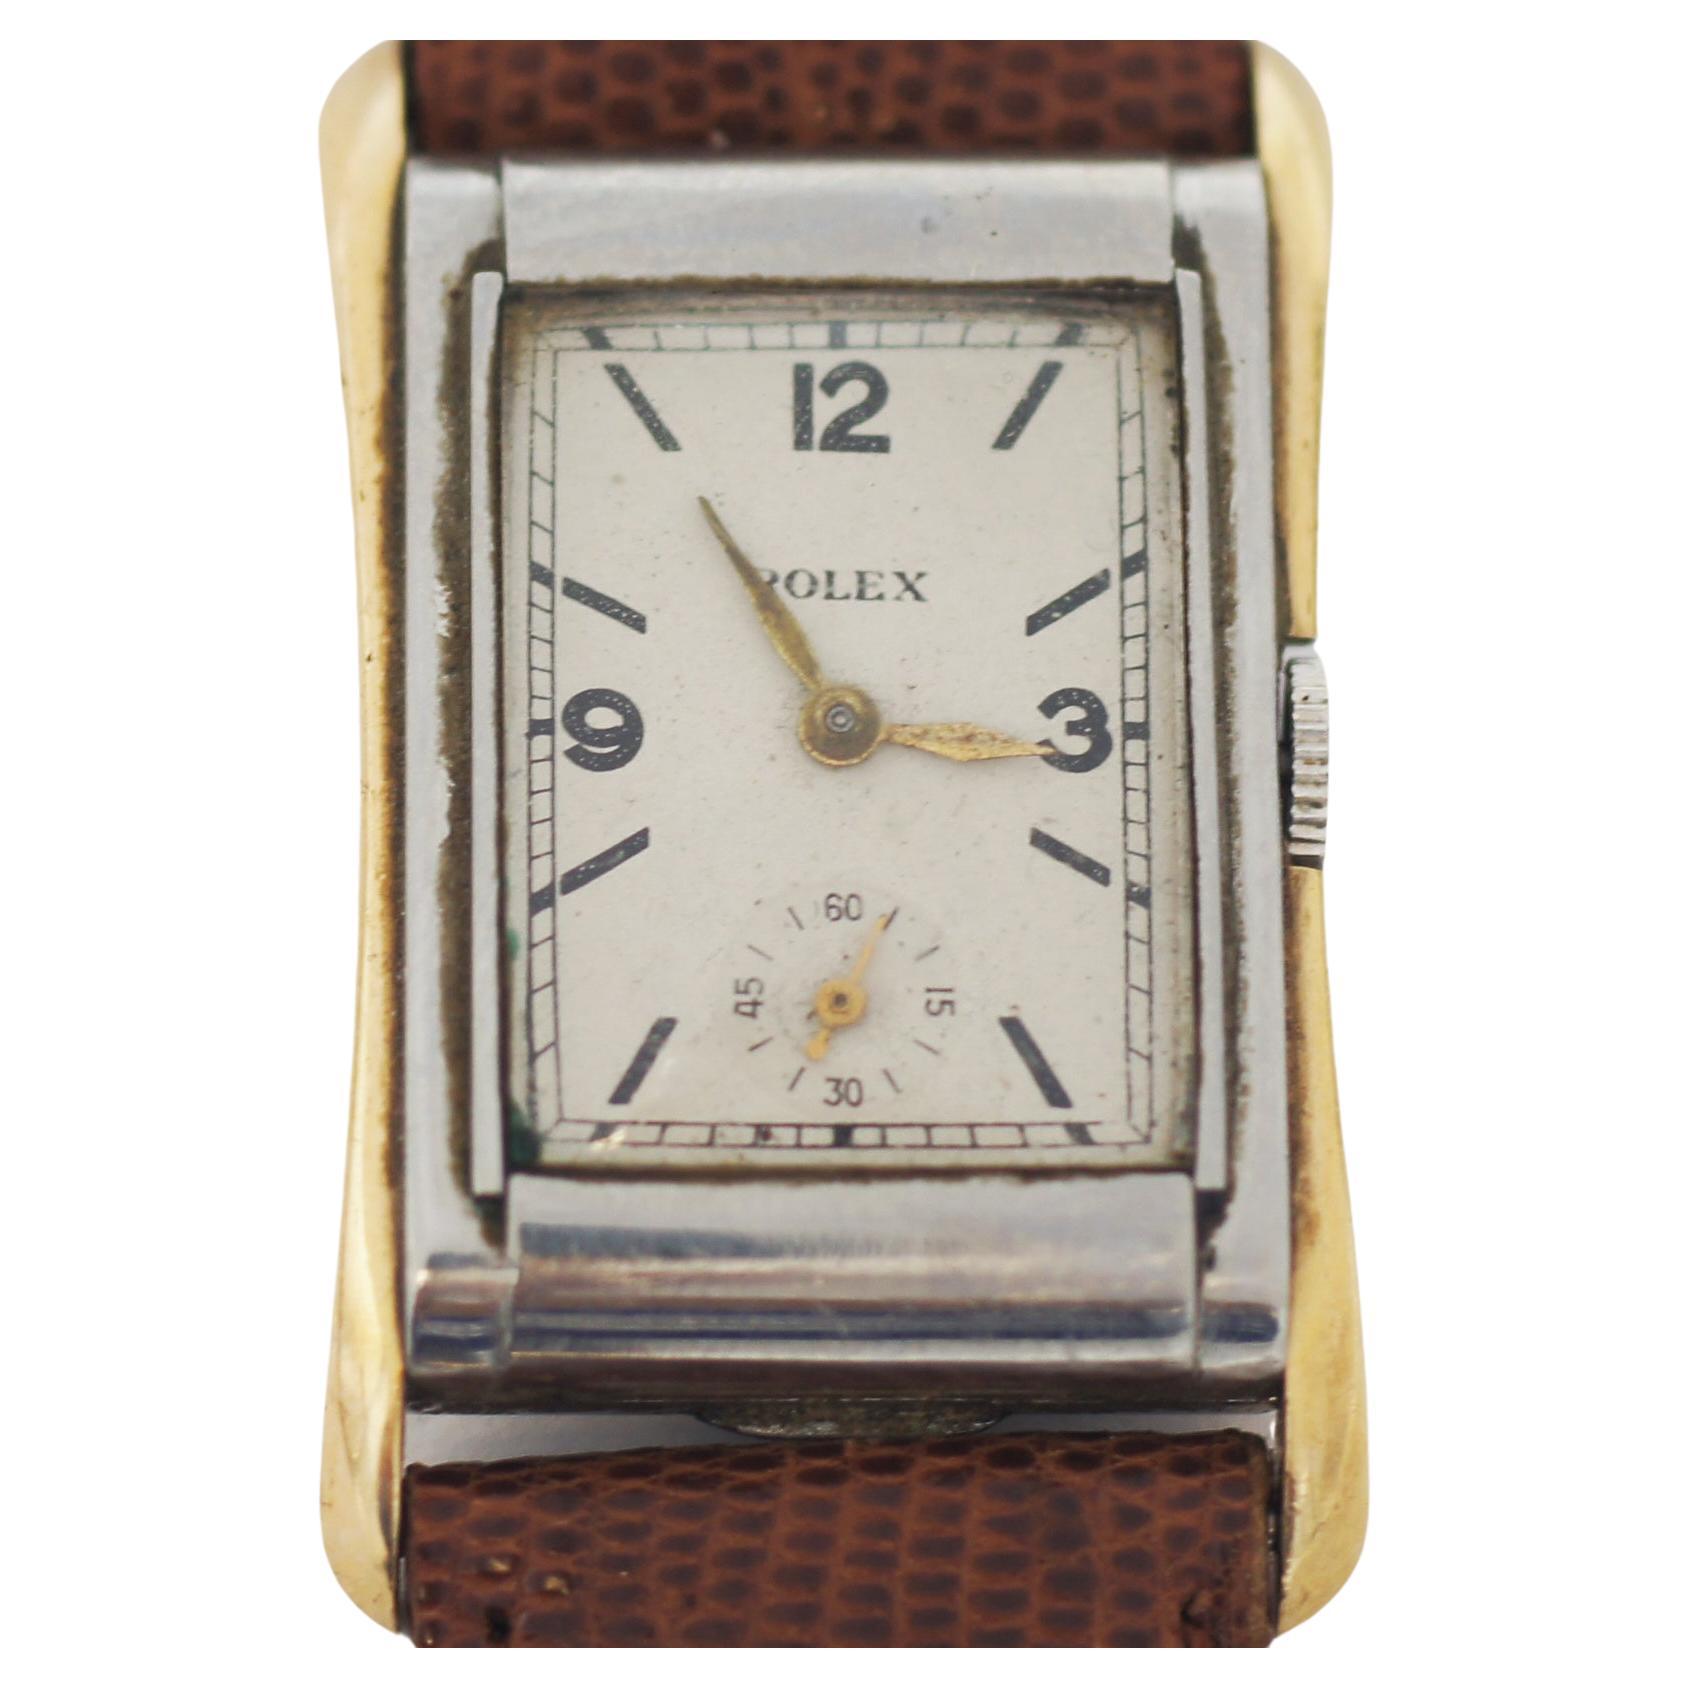 Rolex
Vintage
Cellini prince
Circa approximately 1930s
Steel & Gold case
Dial off white with black numeral and markers
Golden Hands
Second Sub-dial
Case Approx. 28mm x 40mm
Mechanical hand-wind movement
15 Rubies
Leather band
Rolex buckle
watch